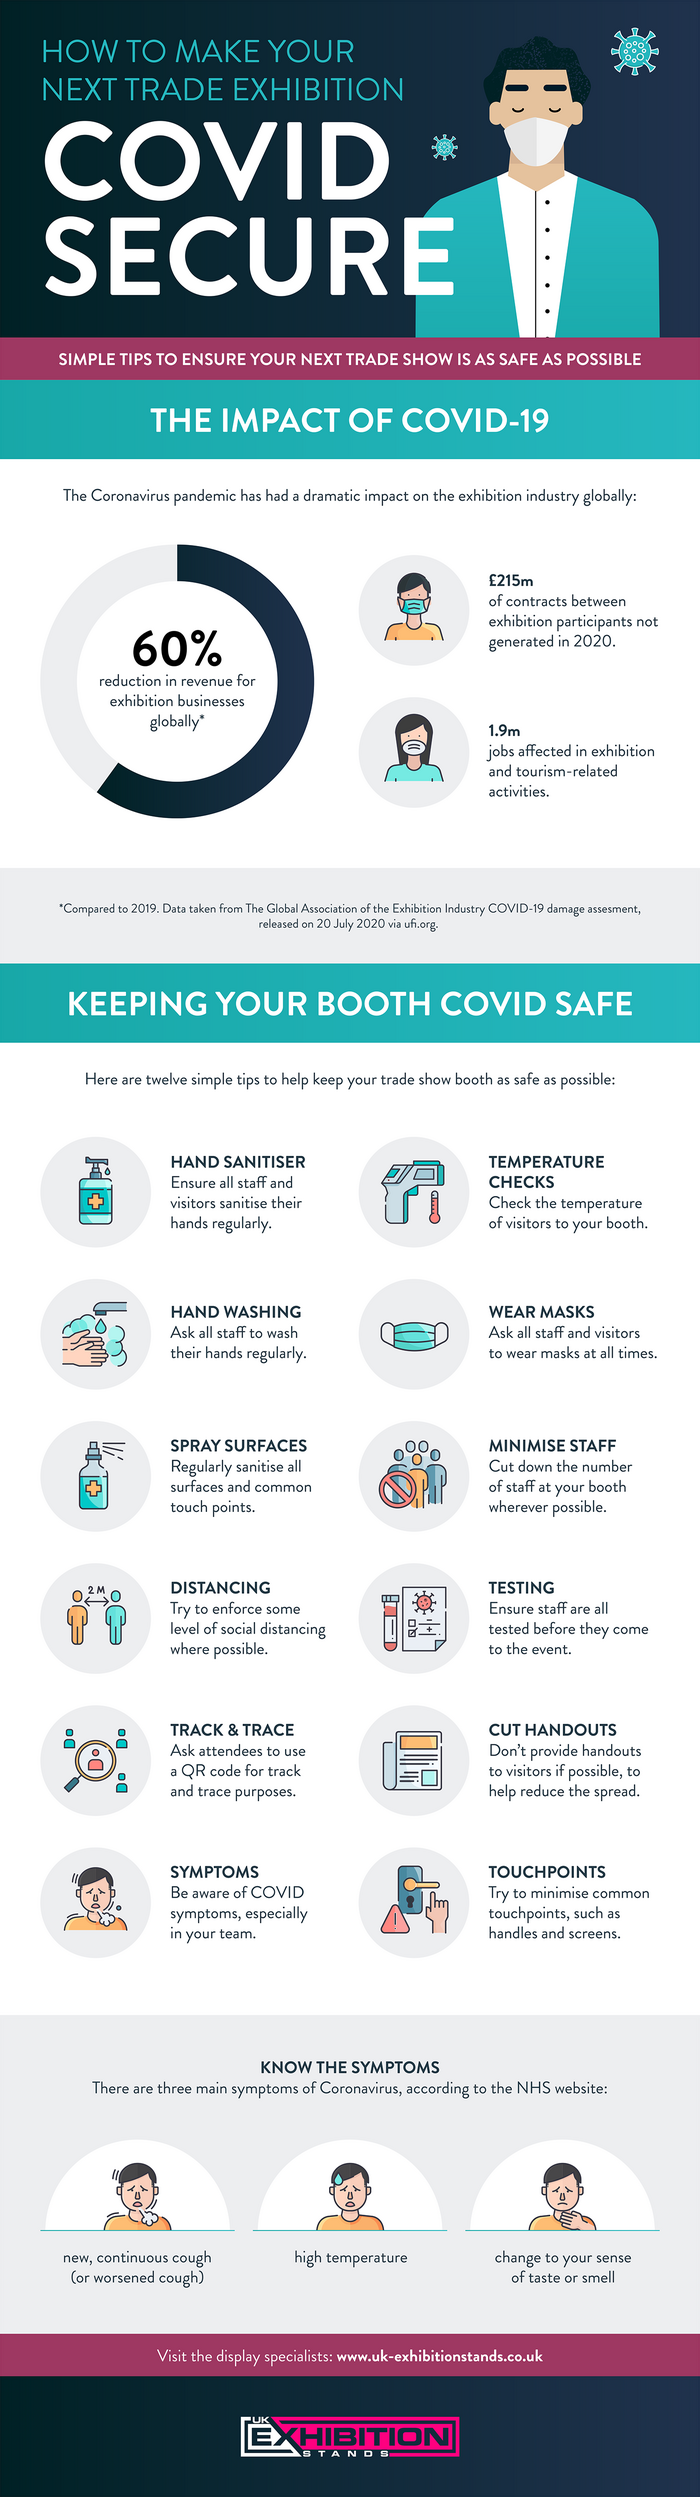 How To Make Your Next Trade Exhibition Covid Secure